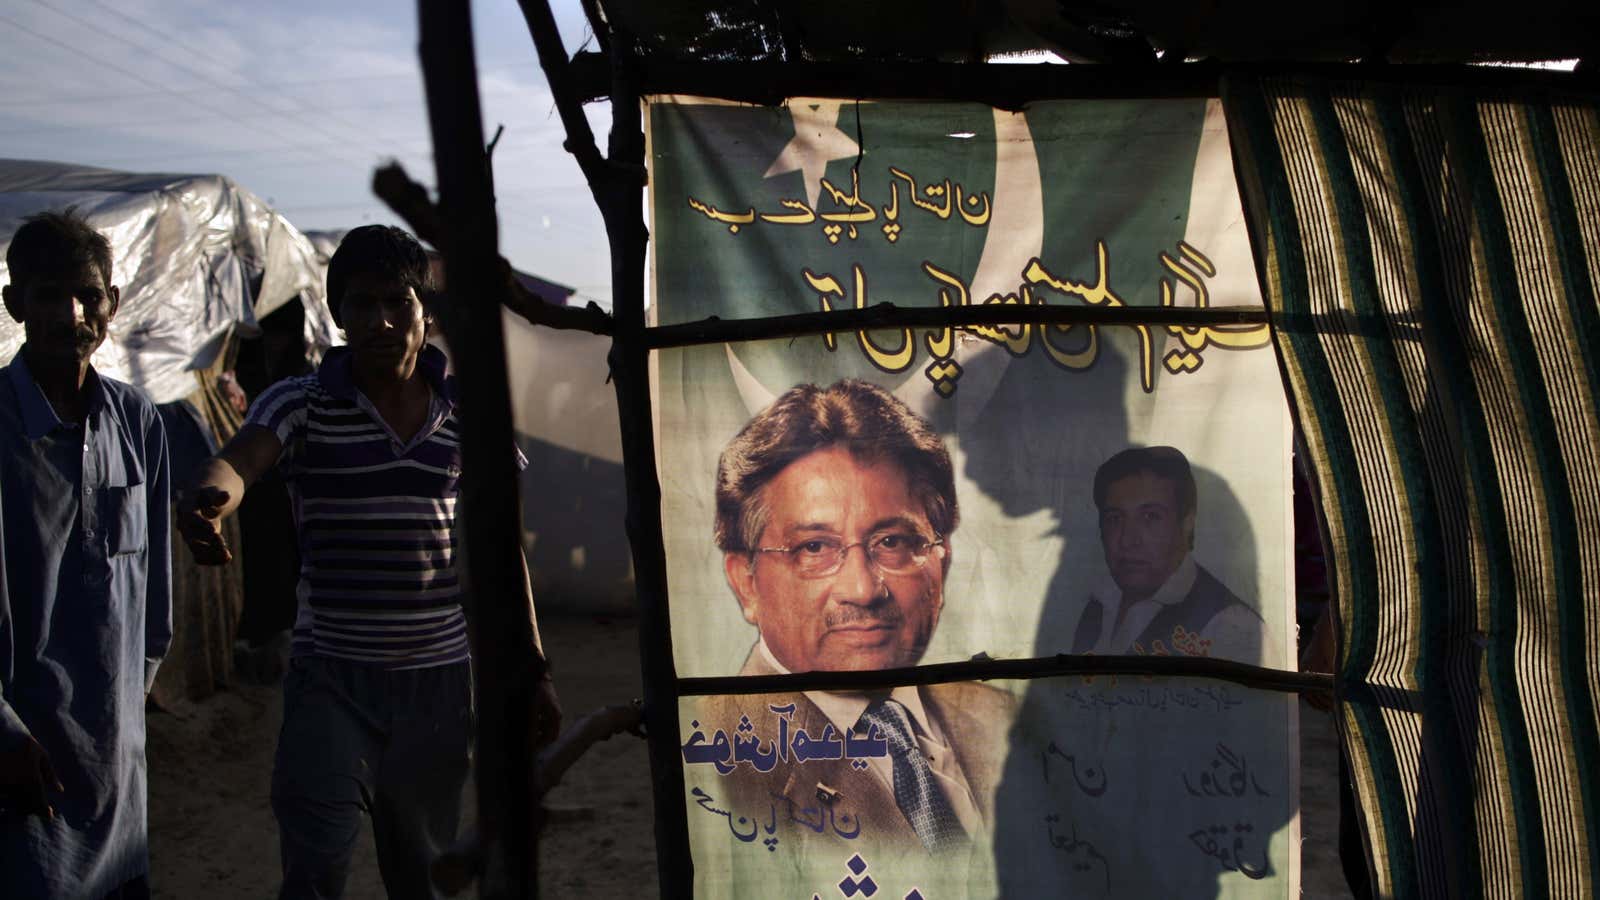 Is it curtains for Musharraf?